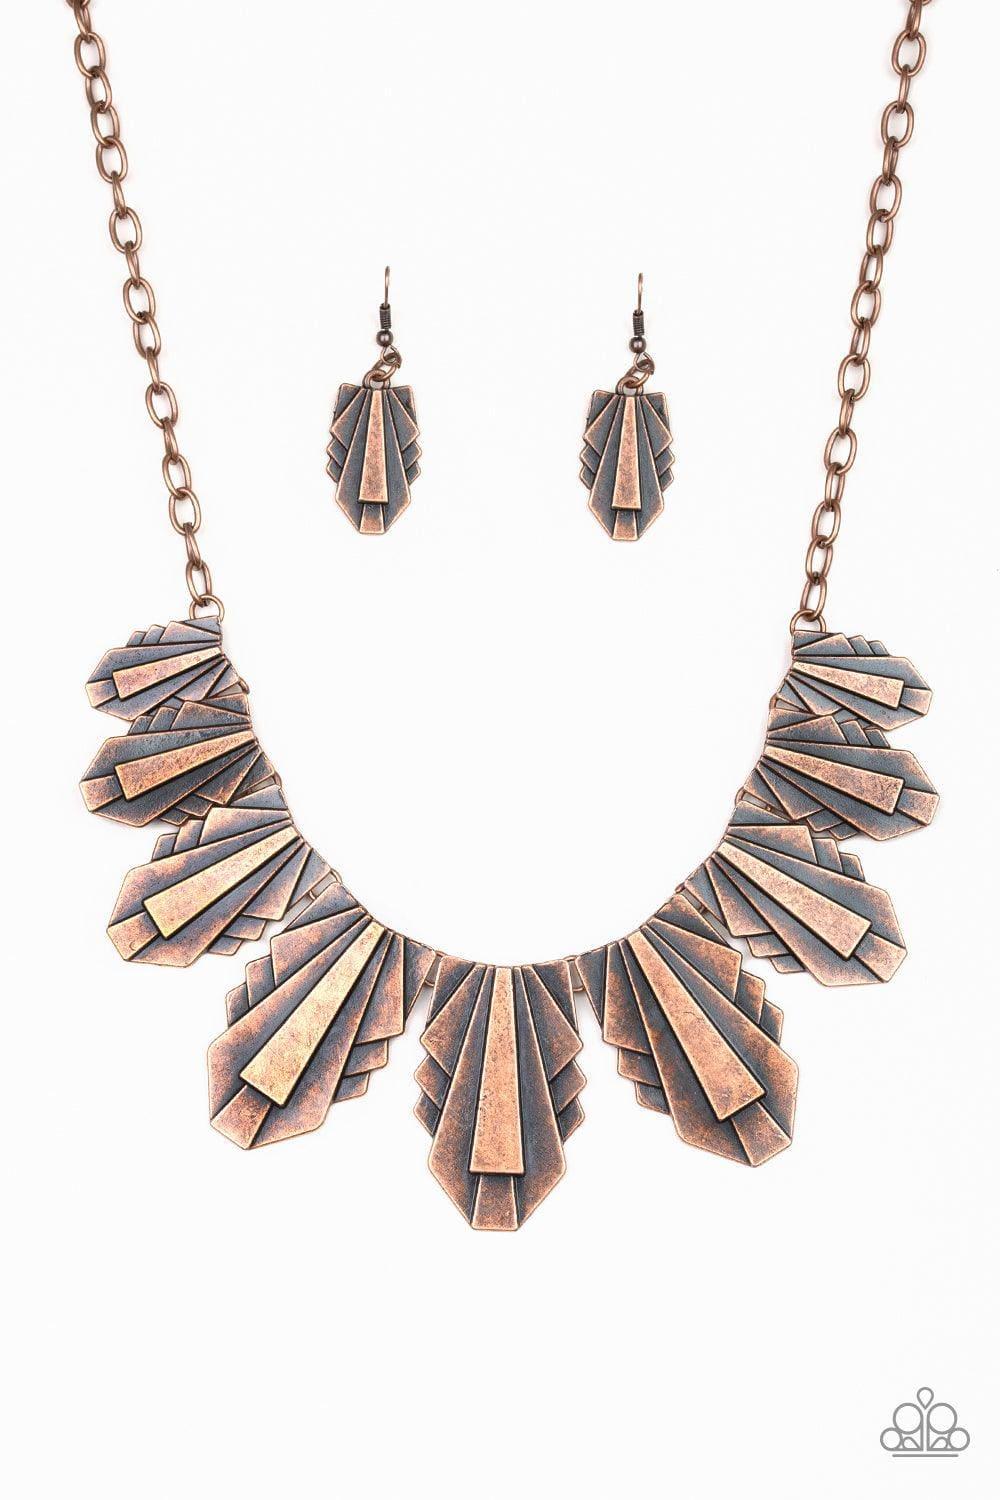 Paparazzi Accessories - Cougar Cave - Copper Necklace - Bling by JessieK